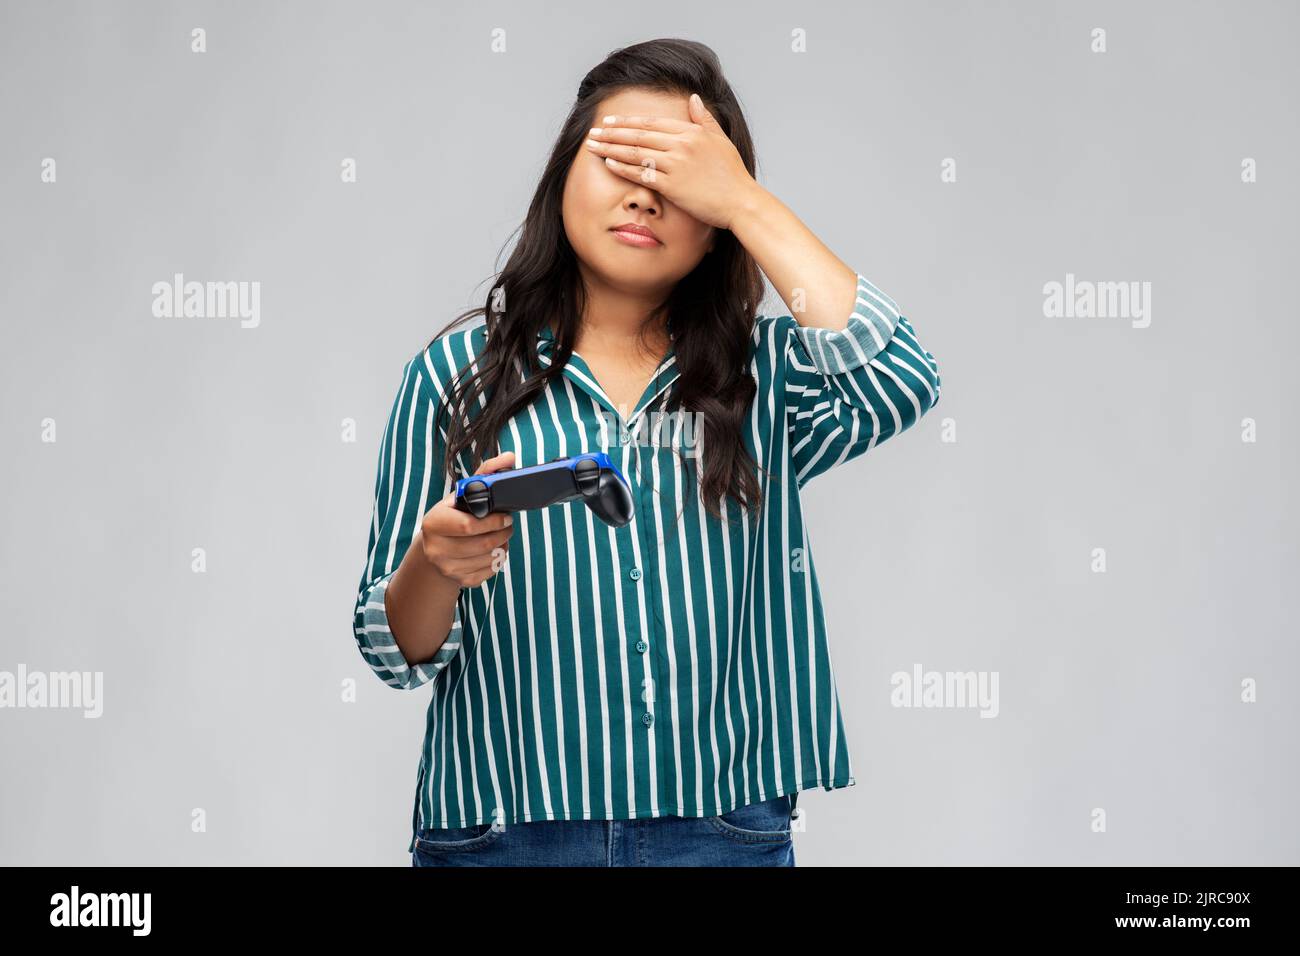 upset asian woman playing video game with gamepad Stock Photo